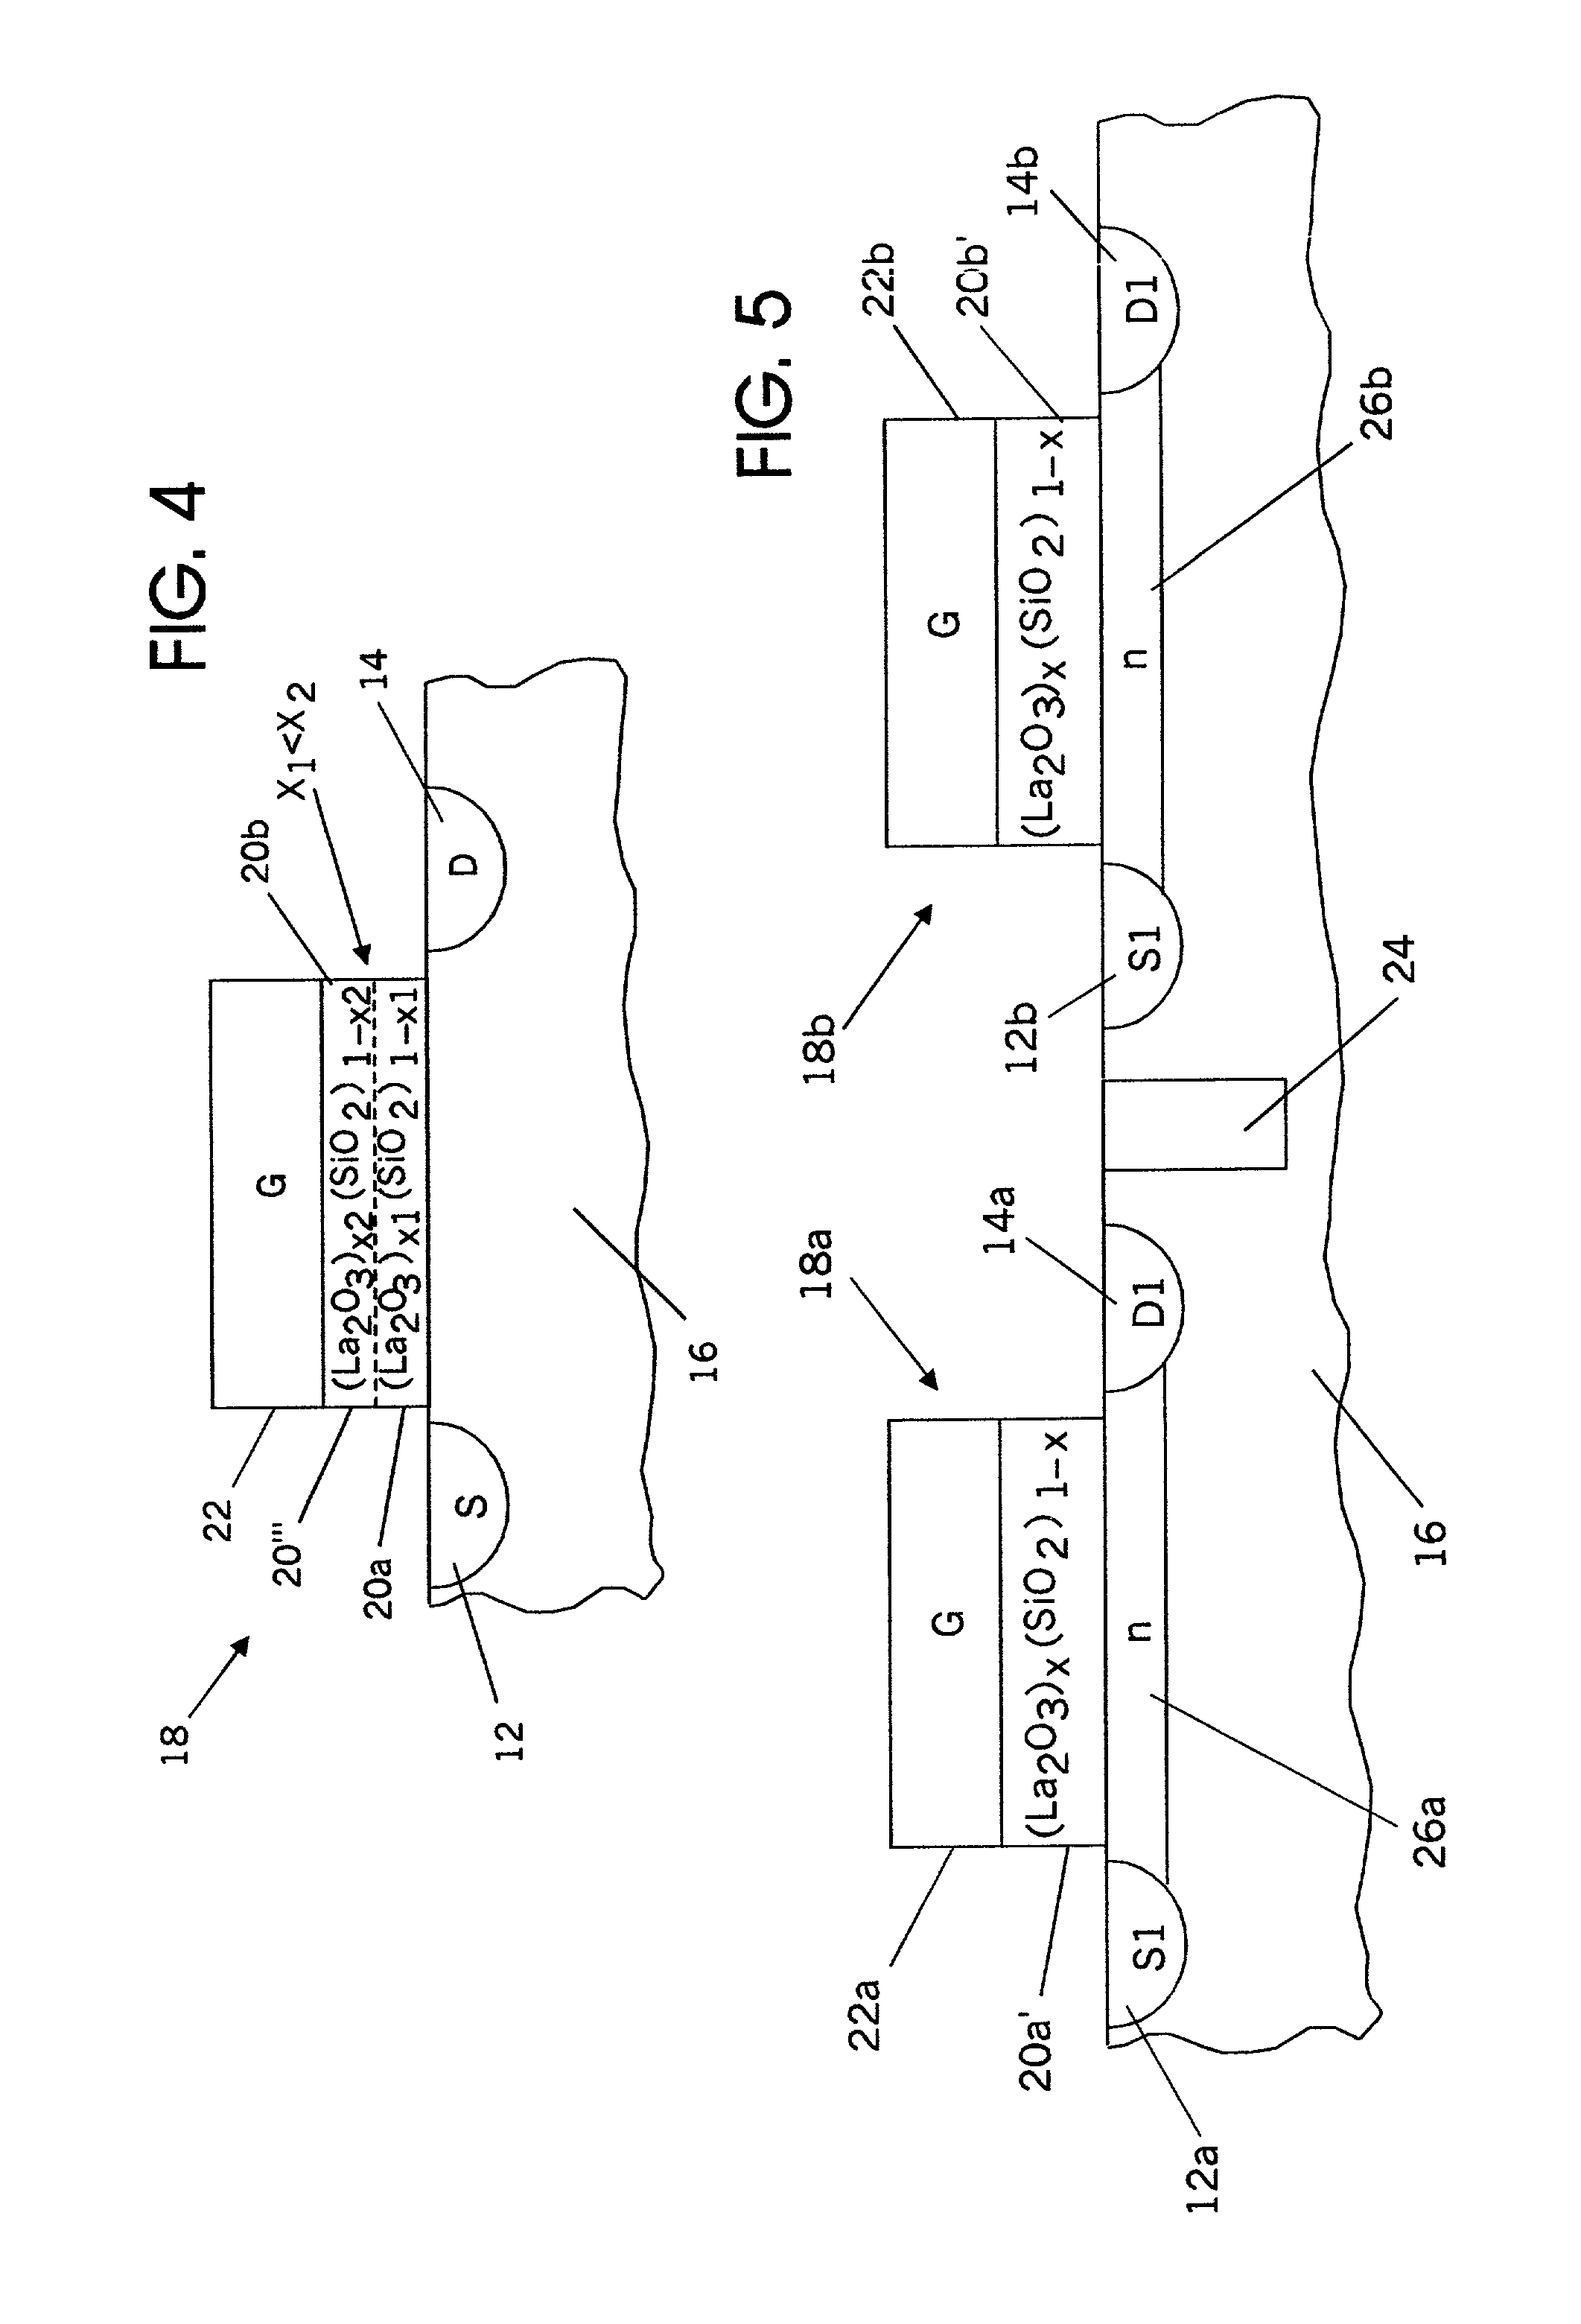 Lanthanum oxide-based gate dielectrics for integrated circuit field effect transistors and methods of fabricating same